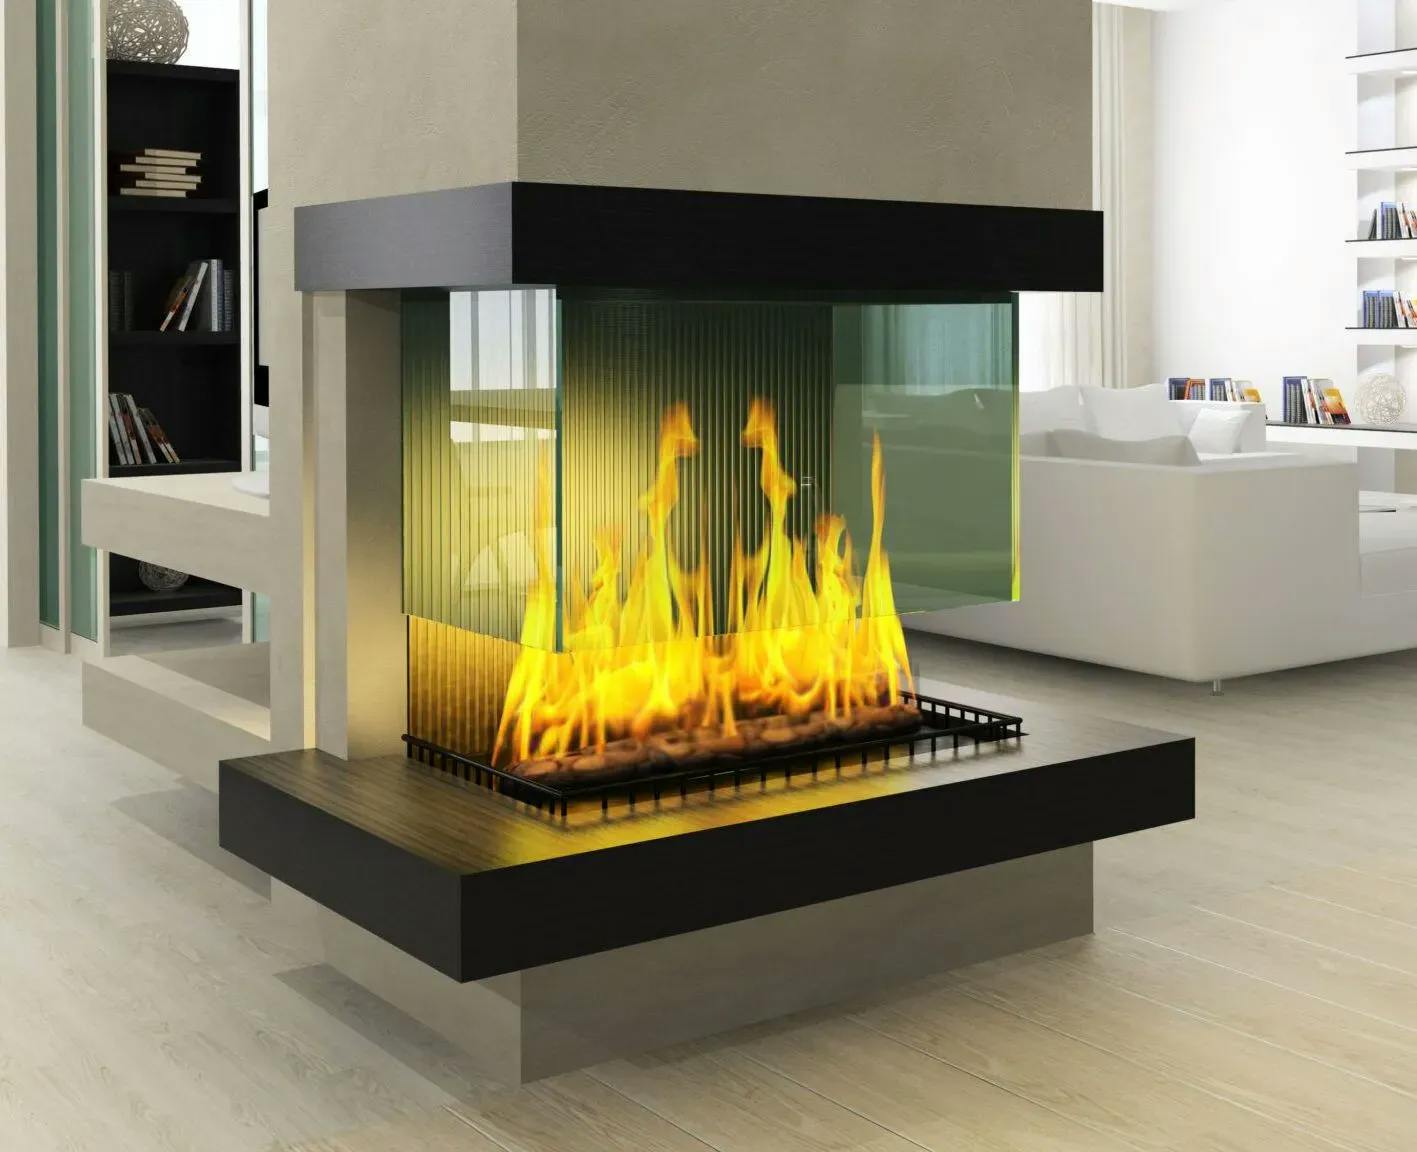 Living room setting with a modern fireplace featuring a burning fire, with the fireplace glass panel suspended from the top of the column